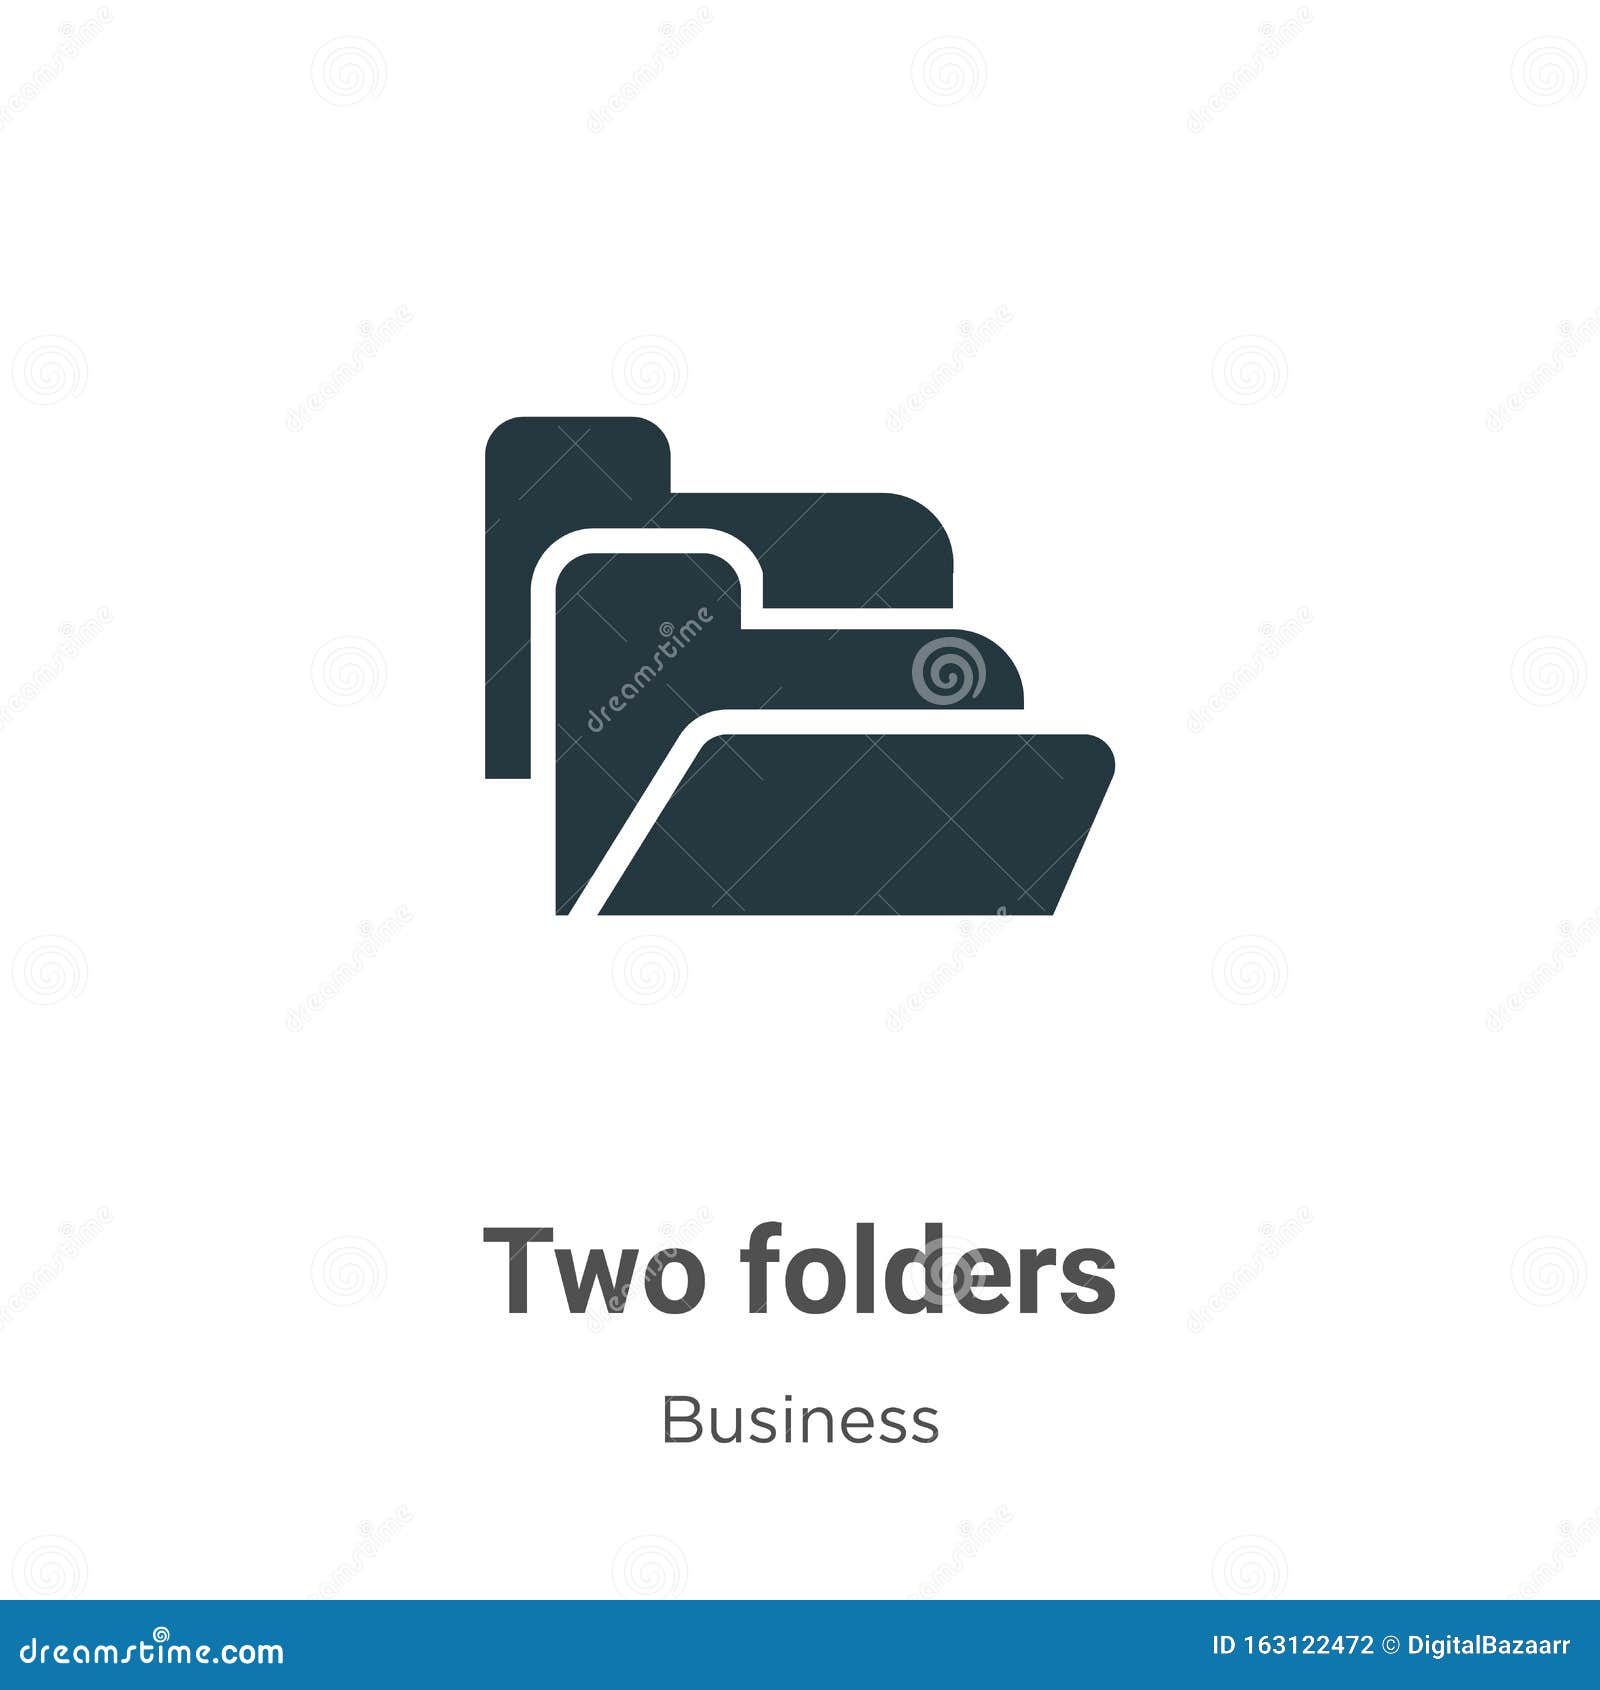 two folders  icon on white background. flat  two folders icon  sign from modern business collection for mobile